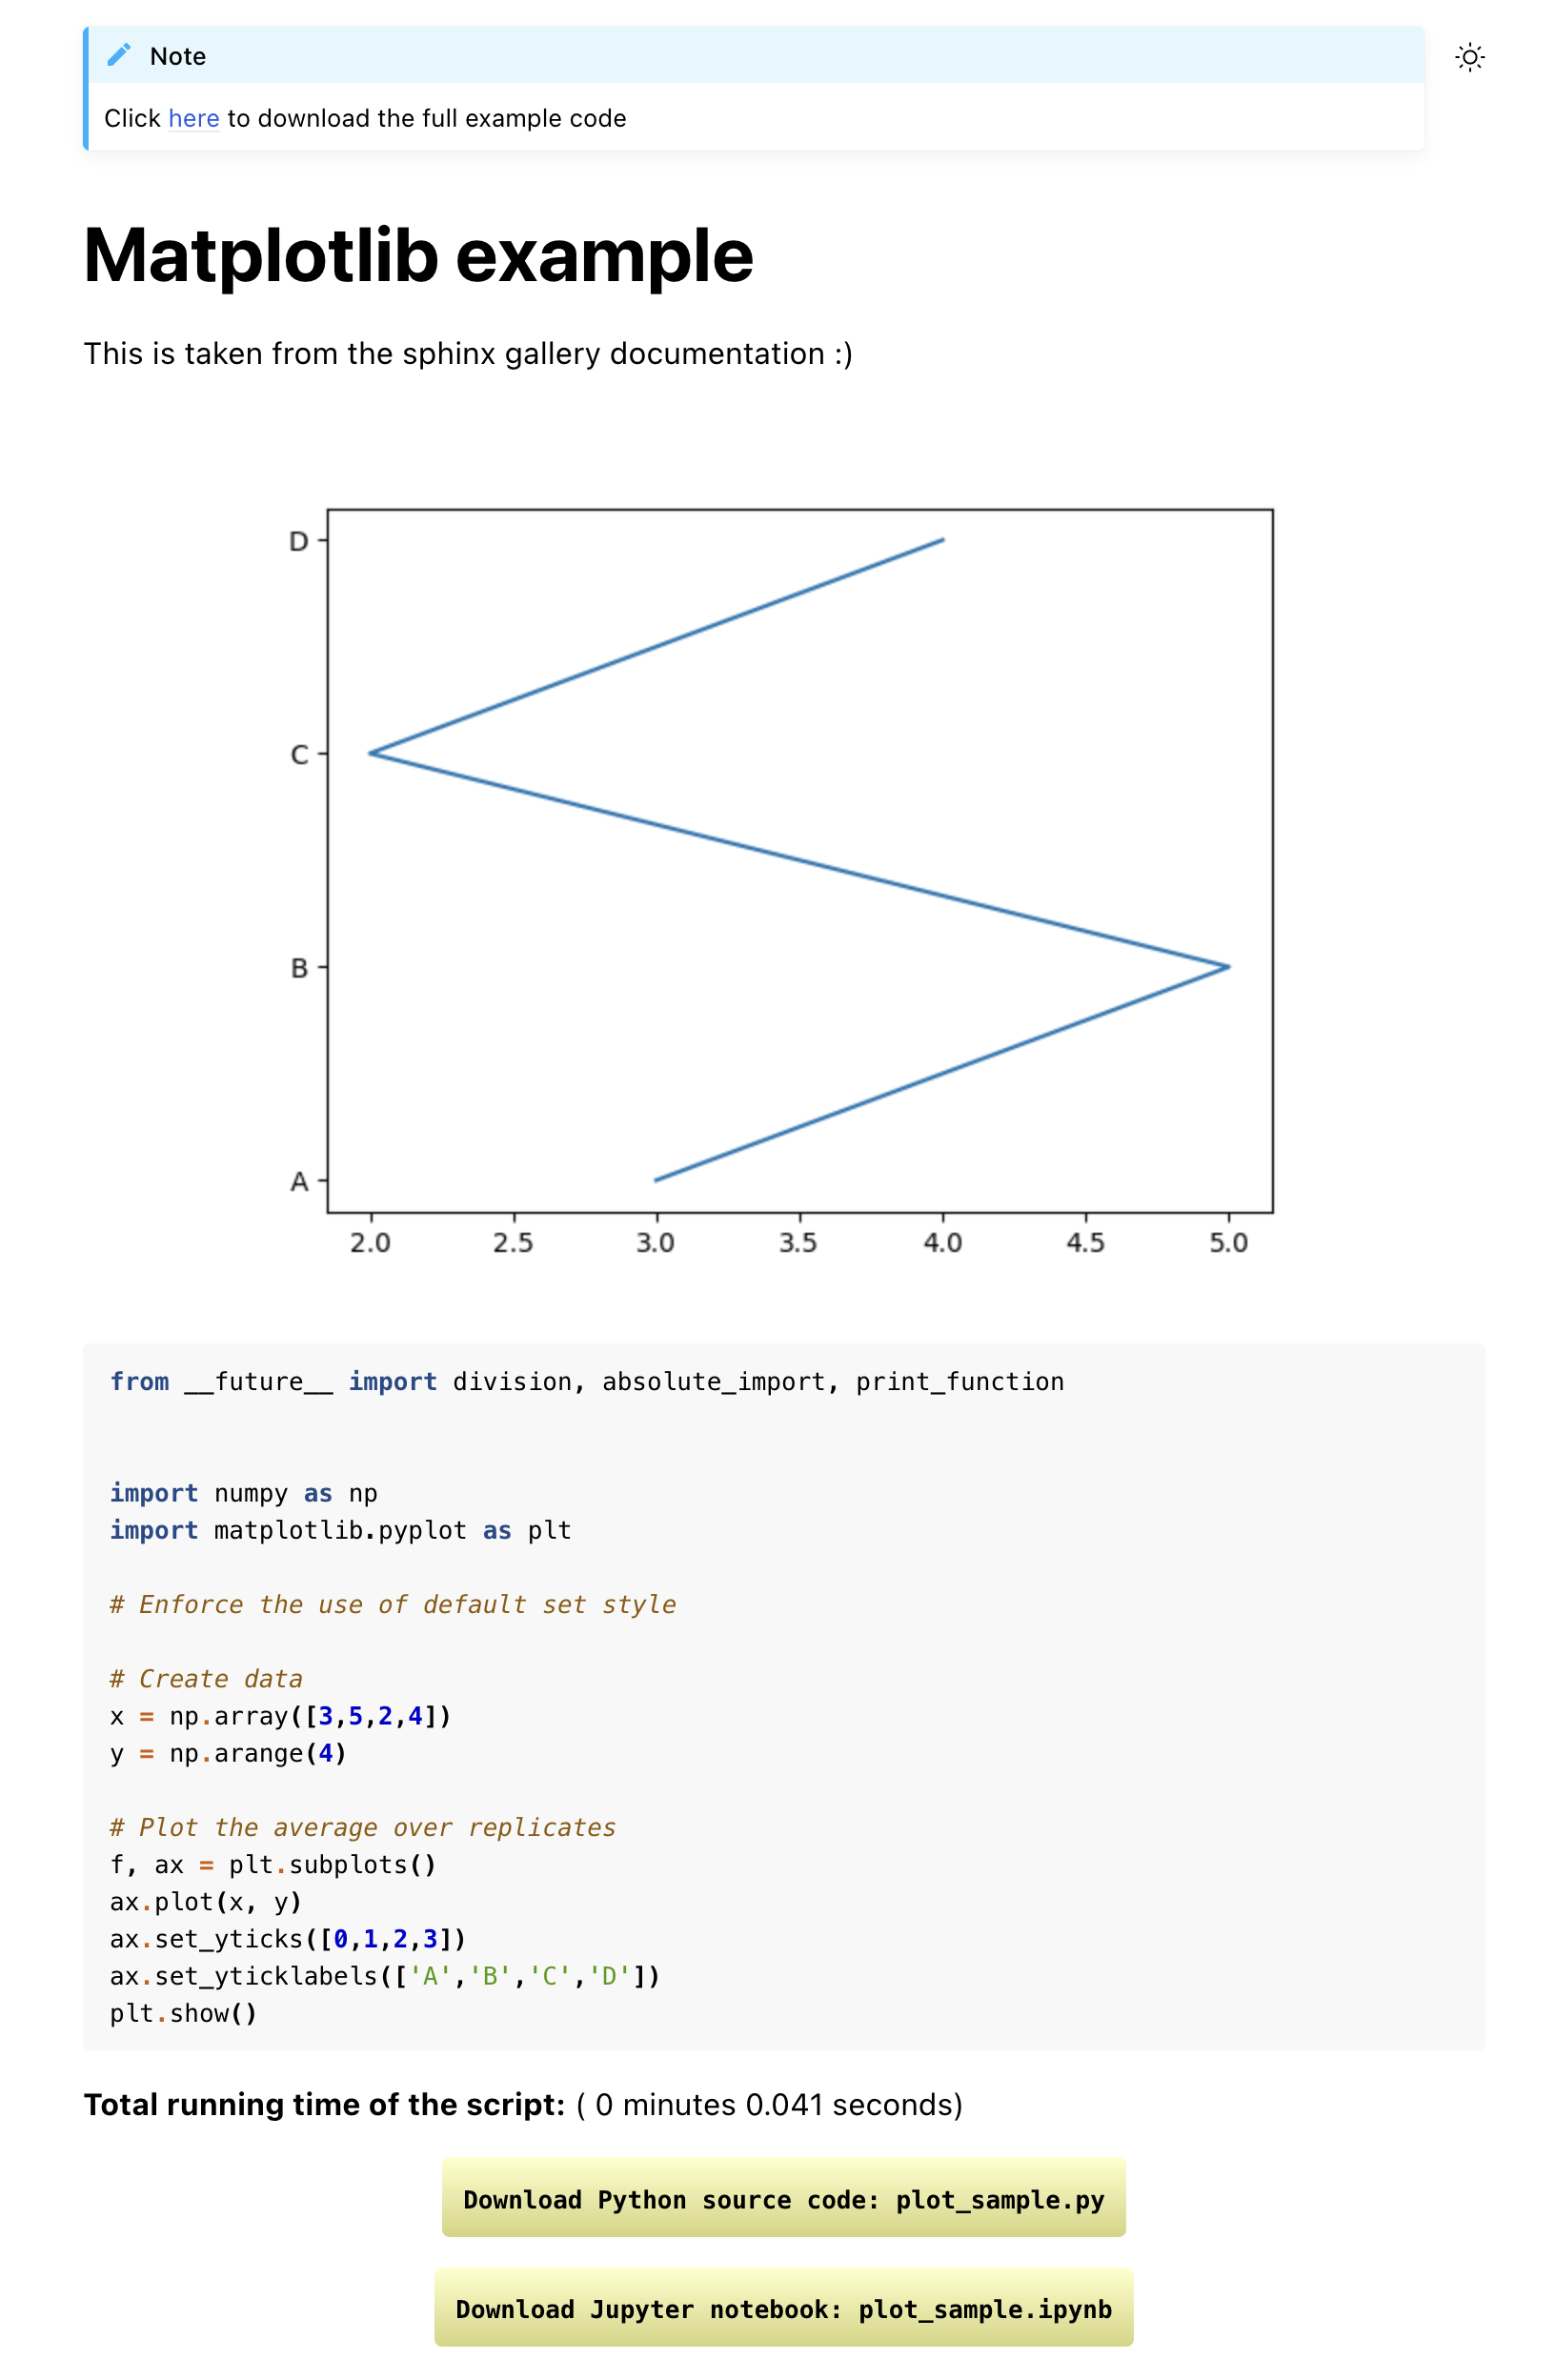 Image showing ta single tutorial from Sphinx gallery. The tutorial shows a simple matplotlib created plot and associated code.